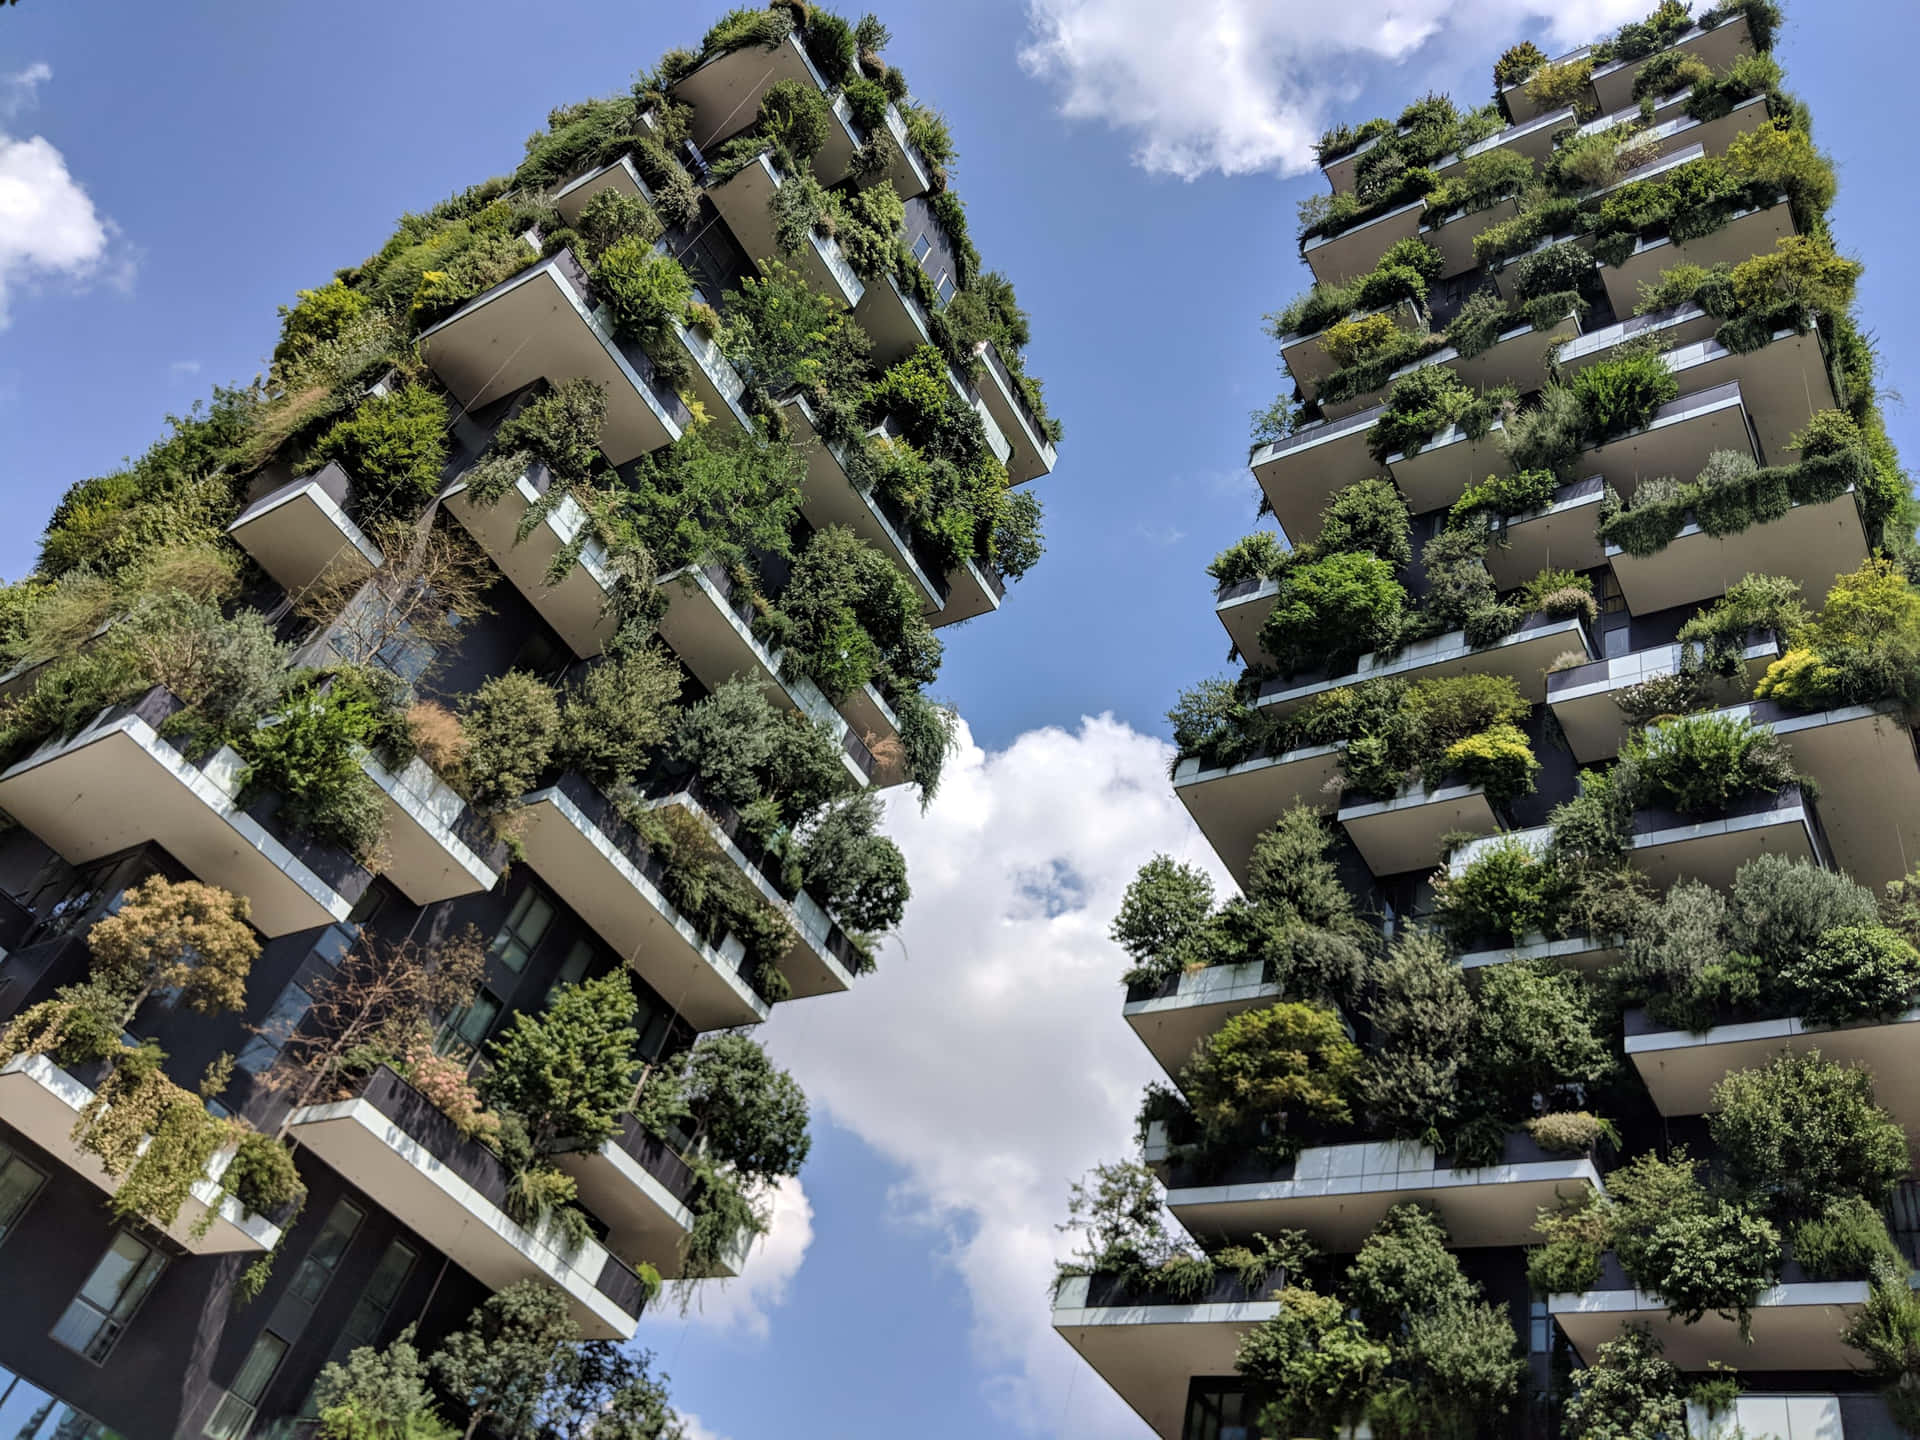 Sustainable Green Buildings in a Modern City Wallpaper